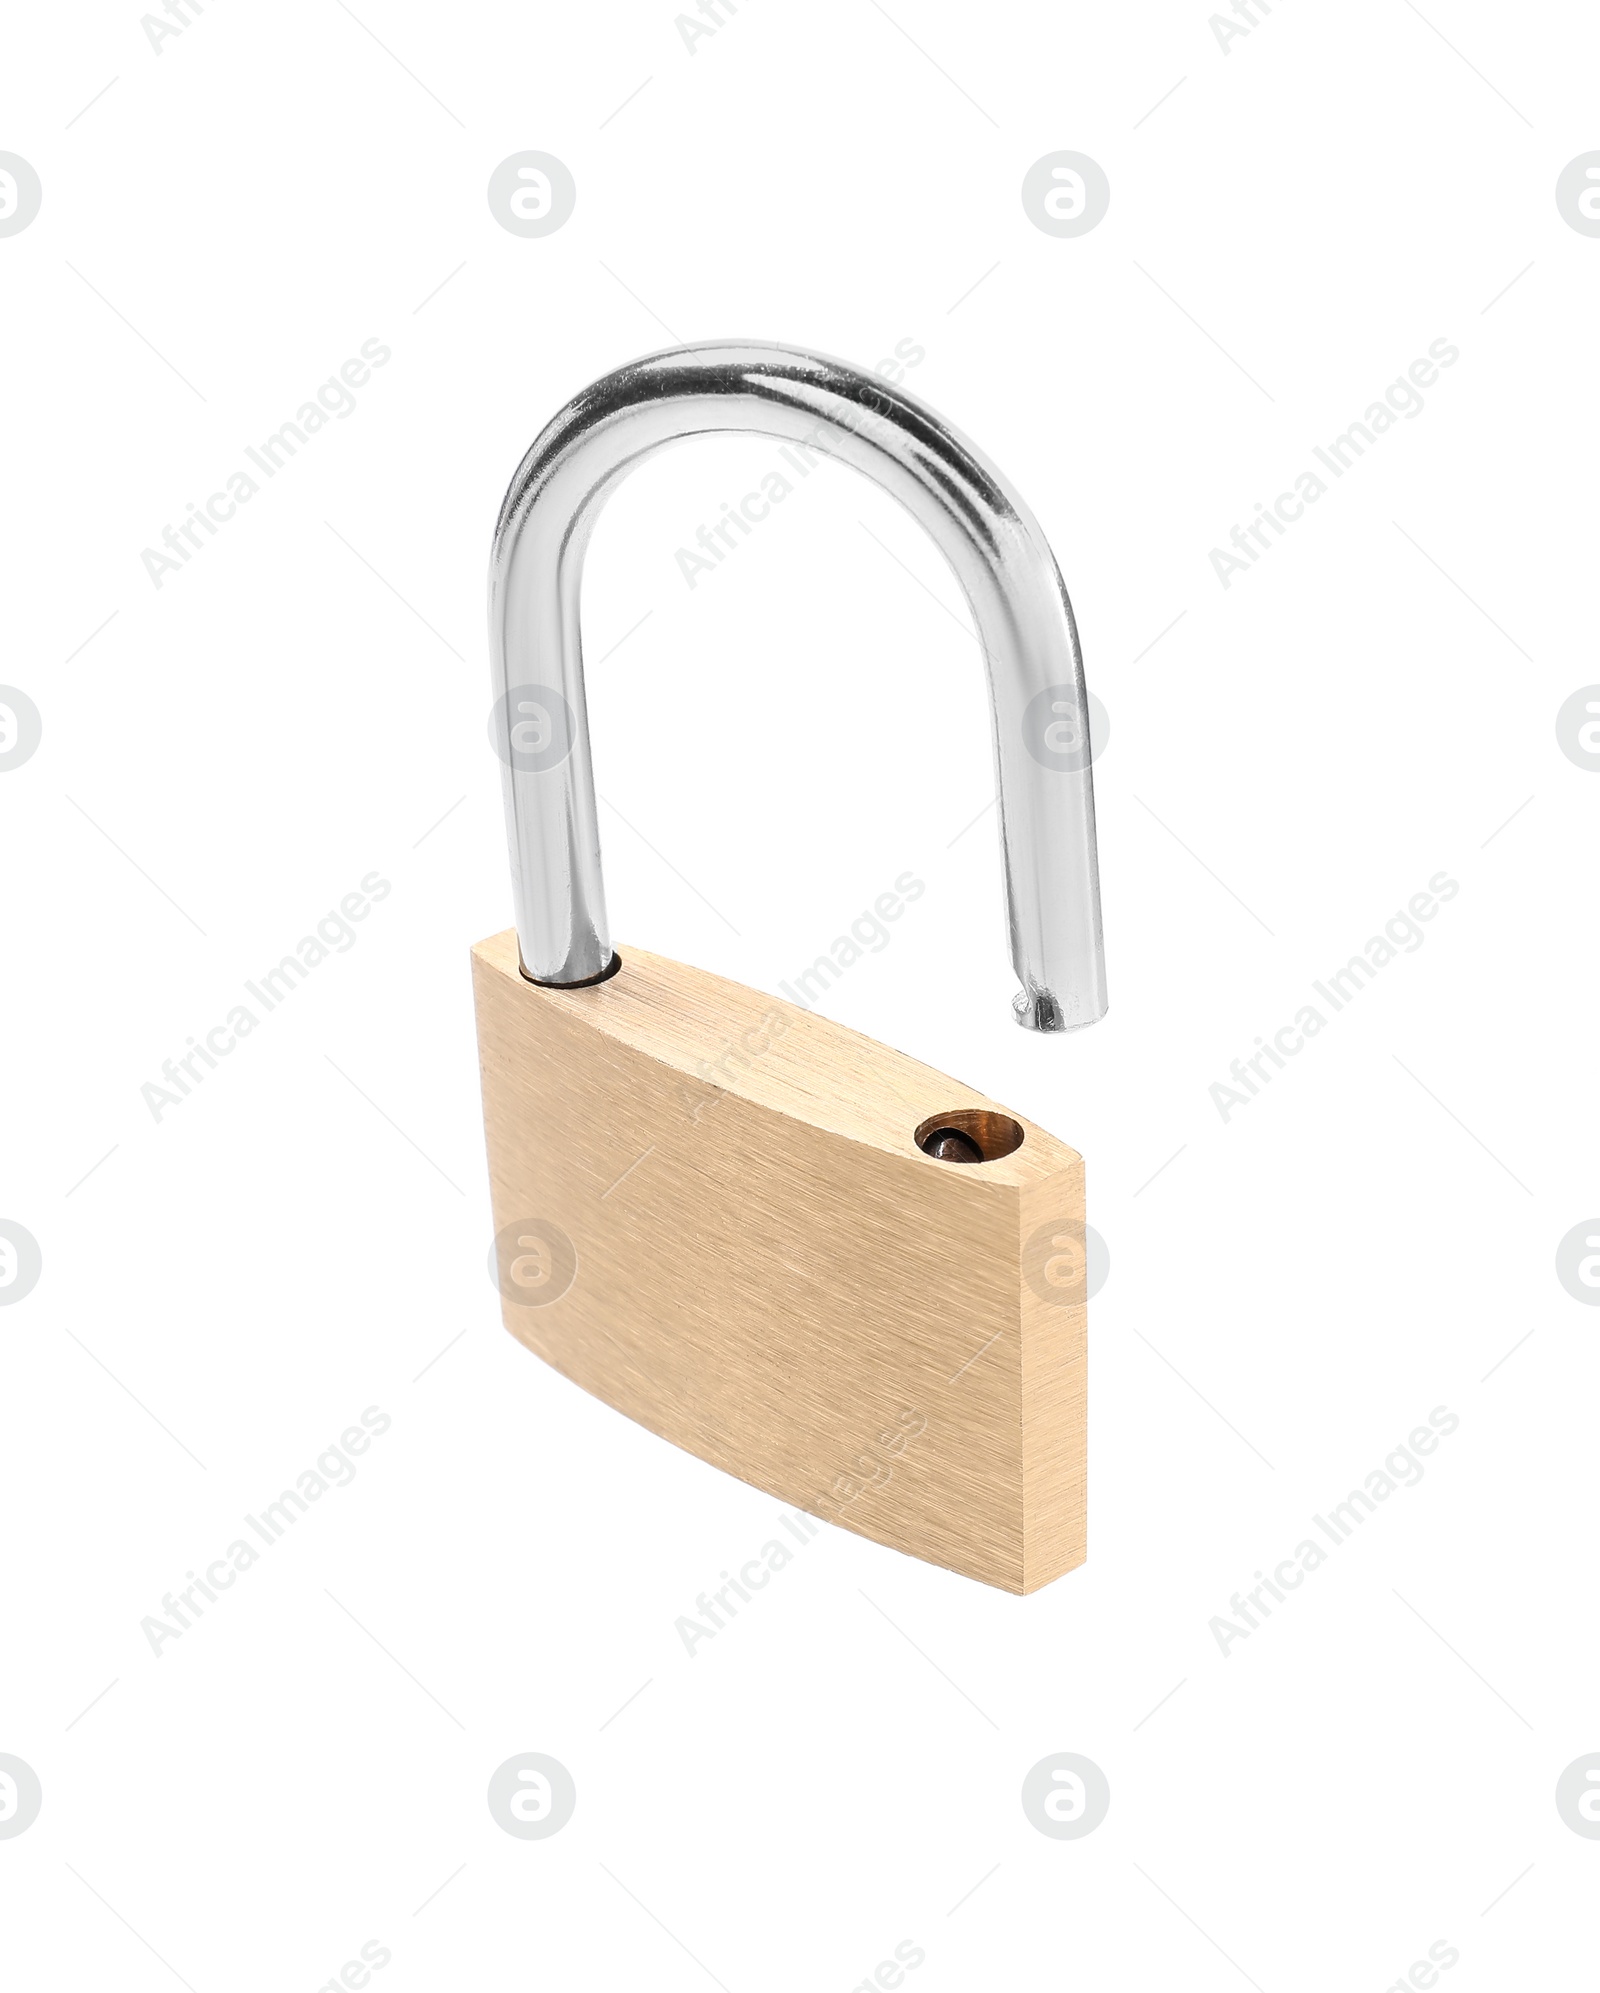 Photo of One new steel padlock isolated on white